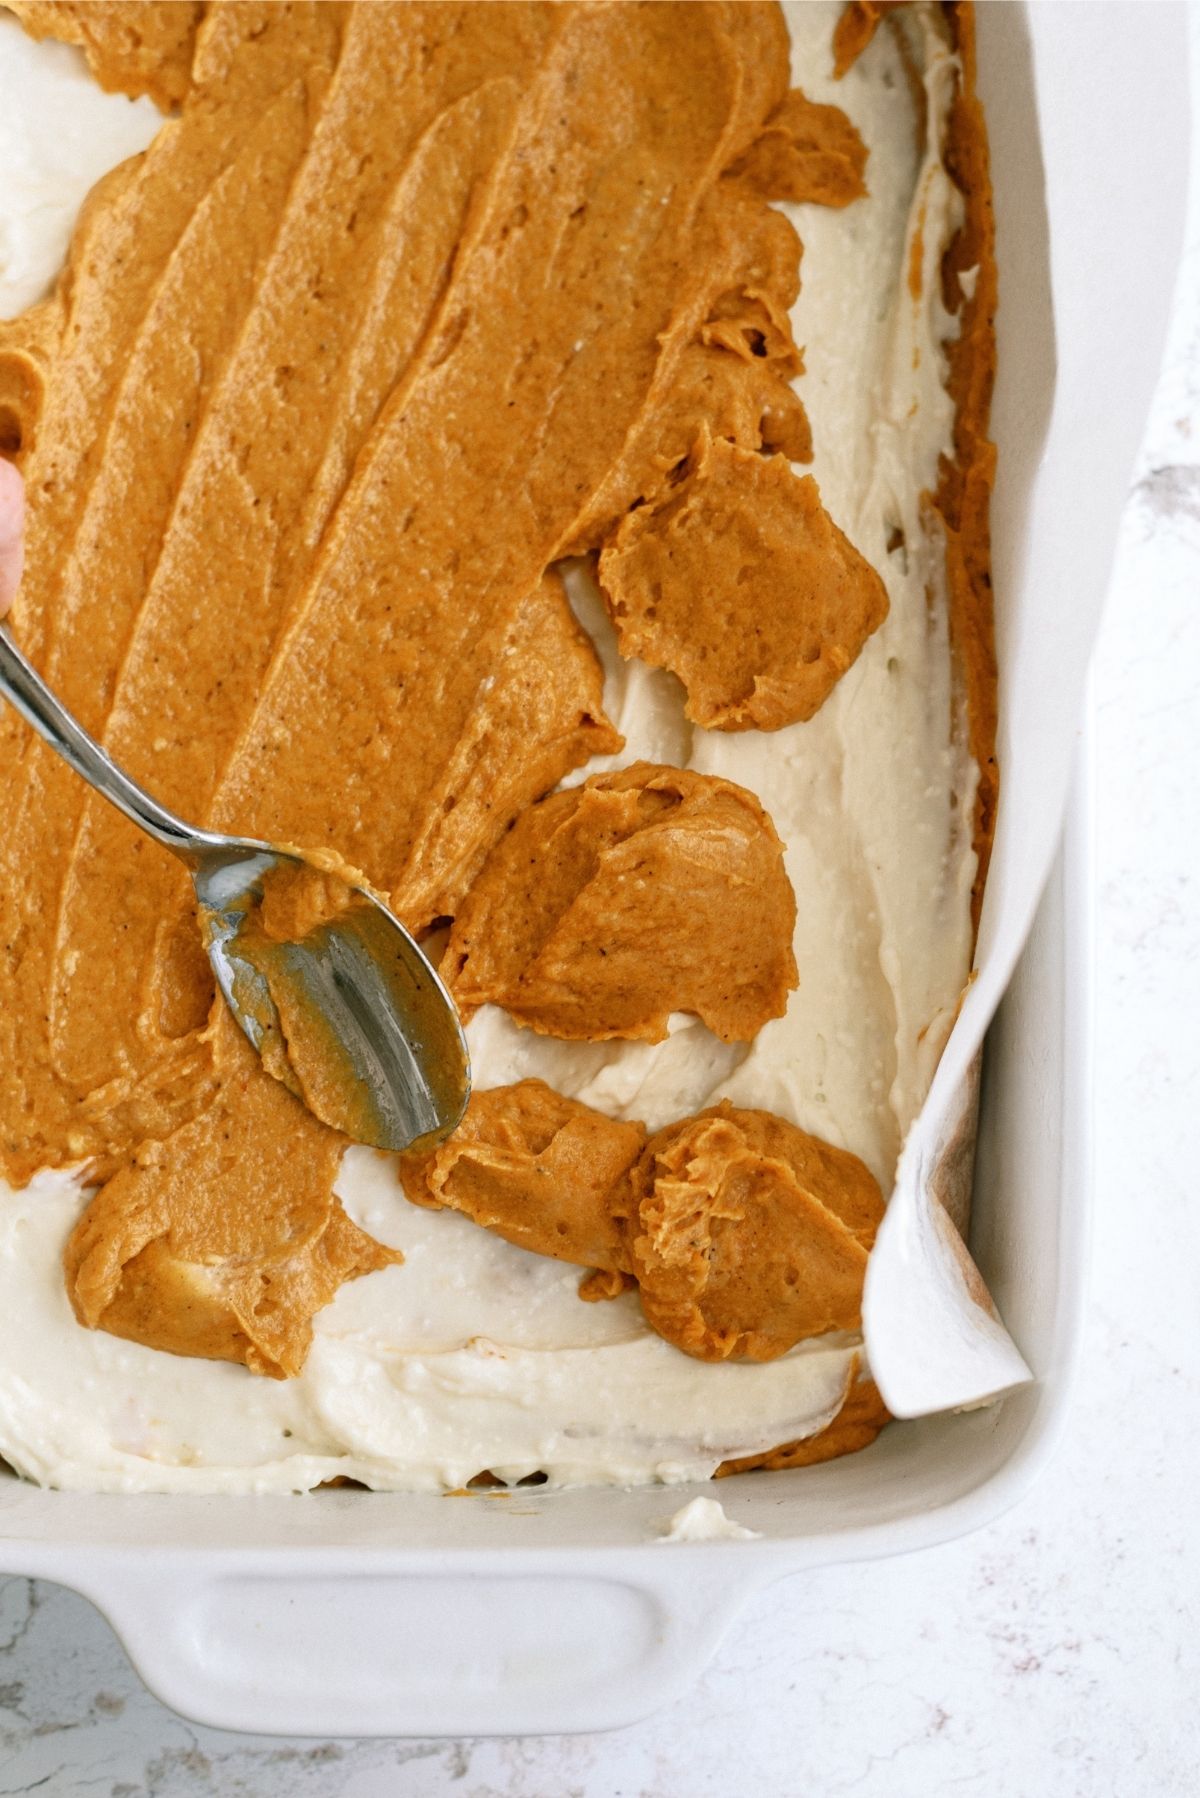 Pumpkin mixture dropped over cream cheese layer